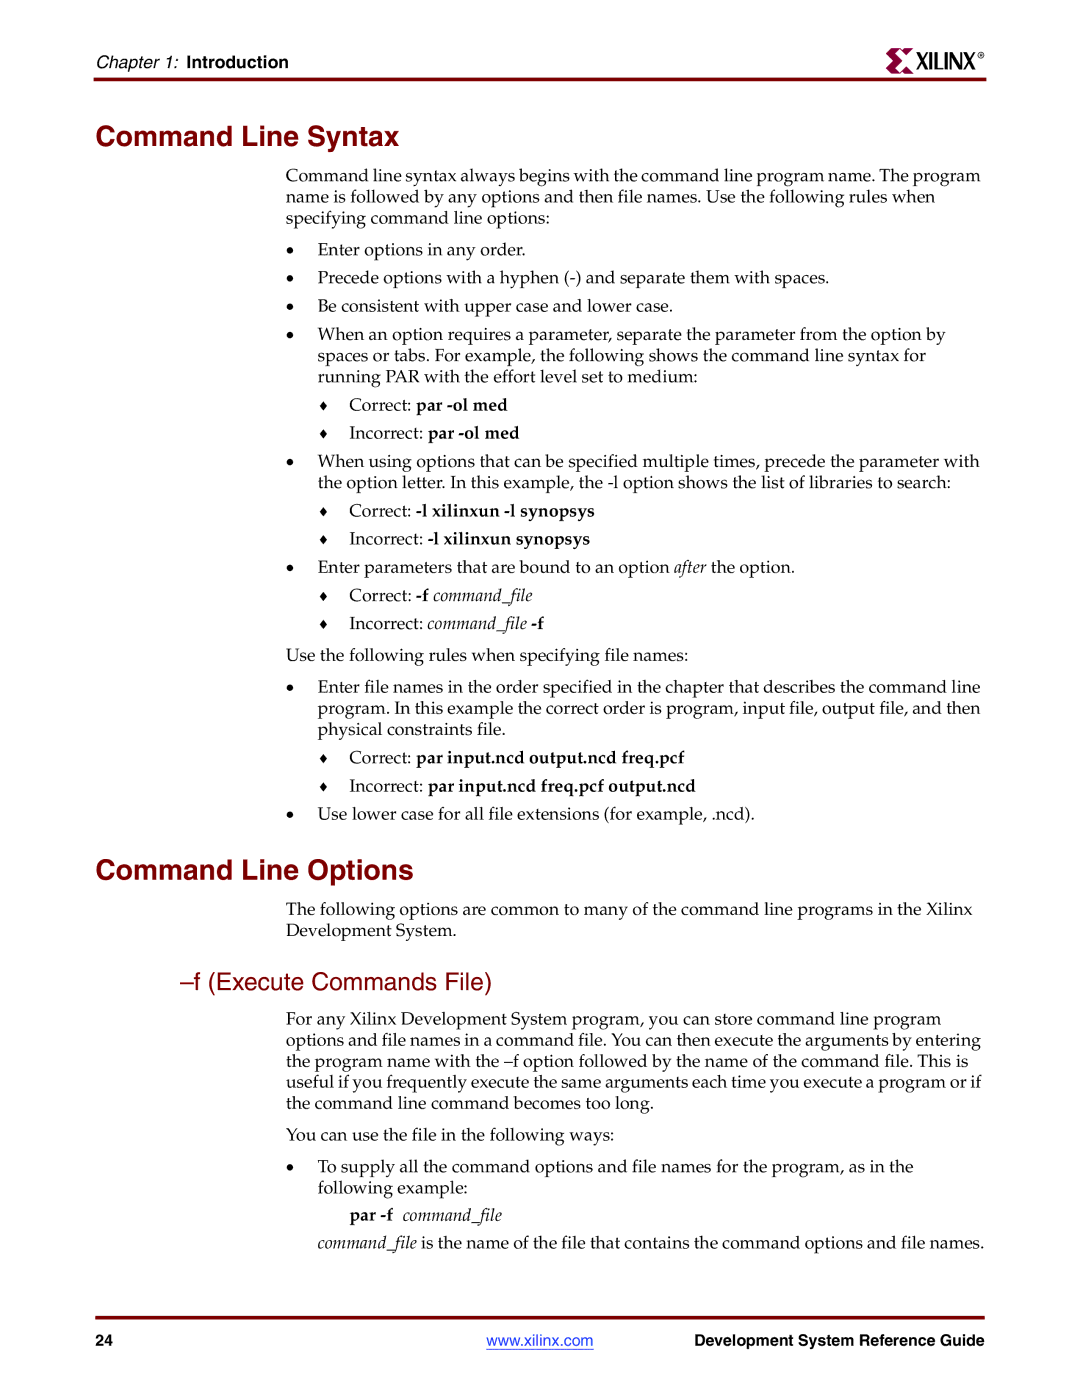 Xilinx 8.2i manual Command Line Syntax, Command Line Options, Execute Commands File, Introduction, Correct par -ol med 